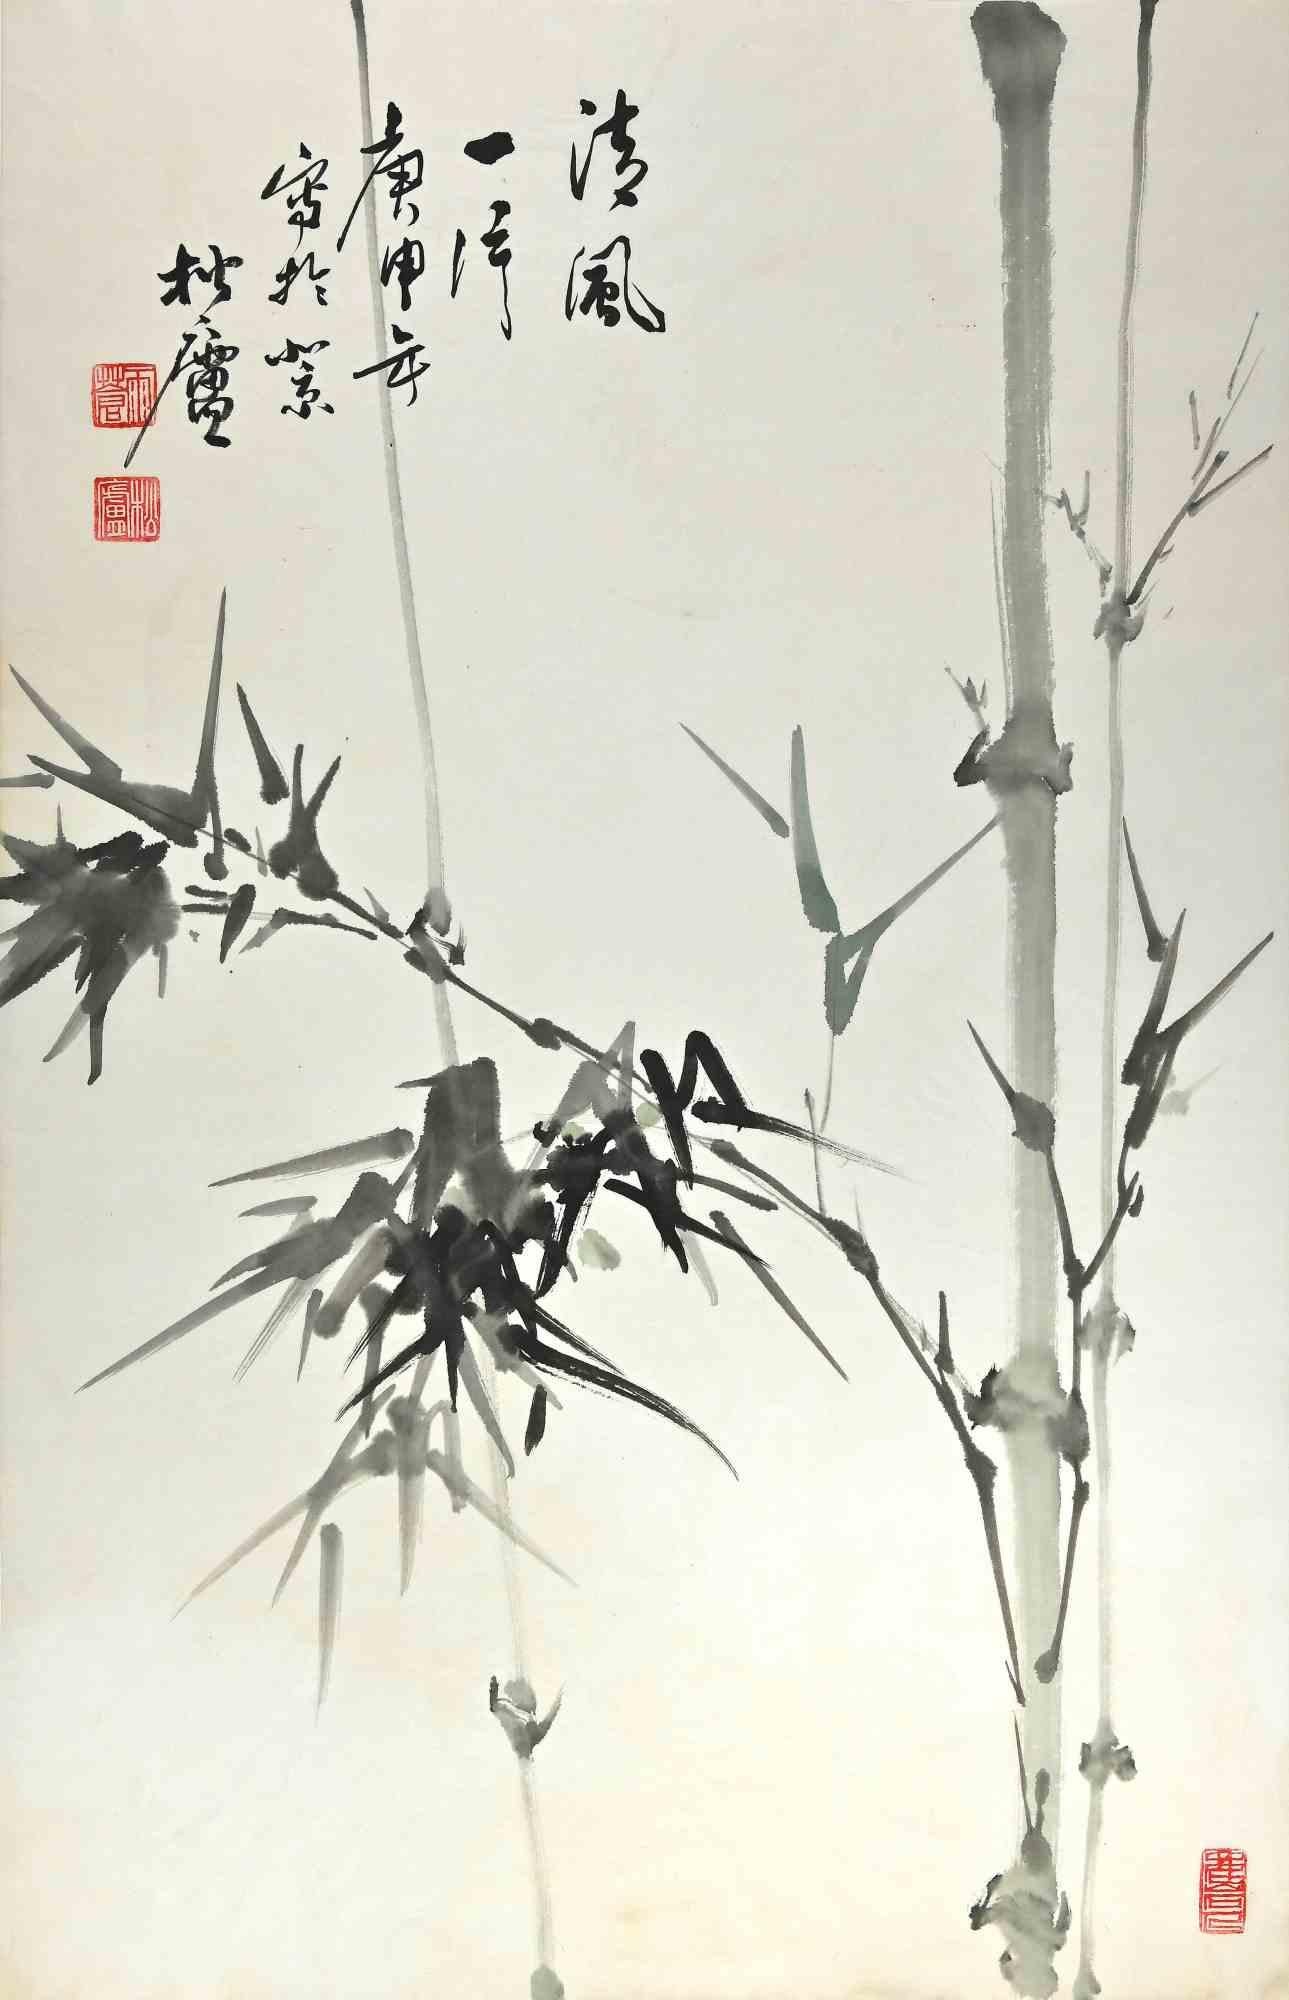 Unknown Figurative Art - Chinese Calligraphy and Bamboo - China Ink - Mid-20th century